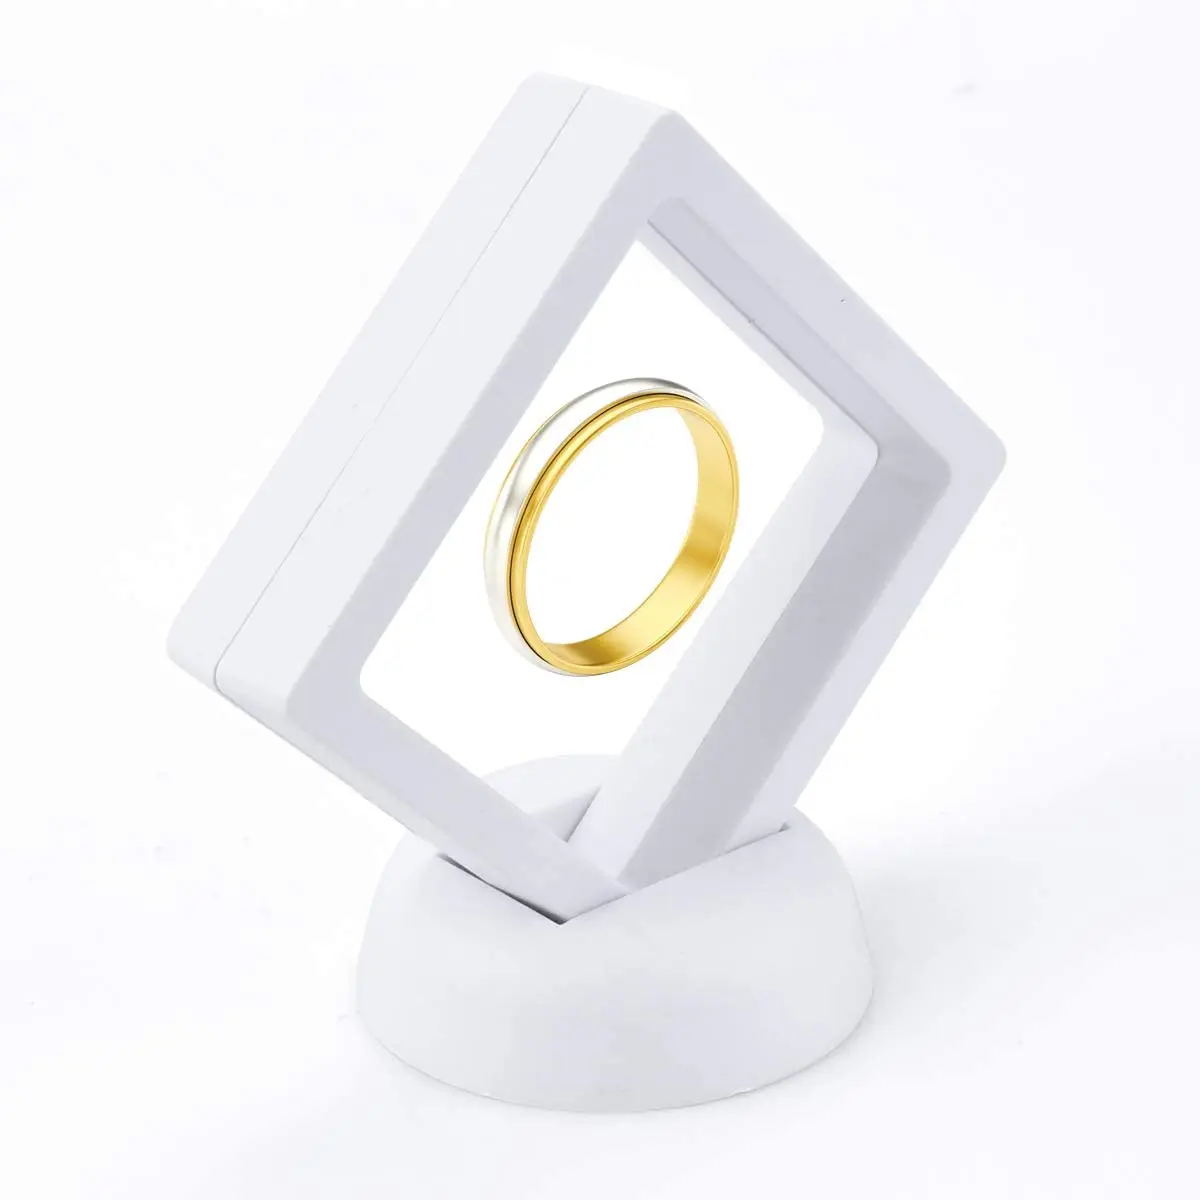 

2021 Display Box Anti-Oxidation Transparent Box Holder Bracelet Ring Necklace Container PE Thin Film Suspension 3D Floating